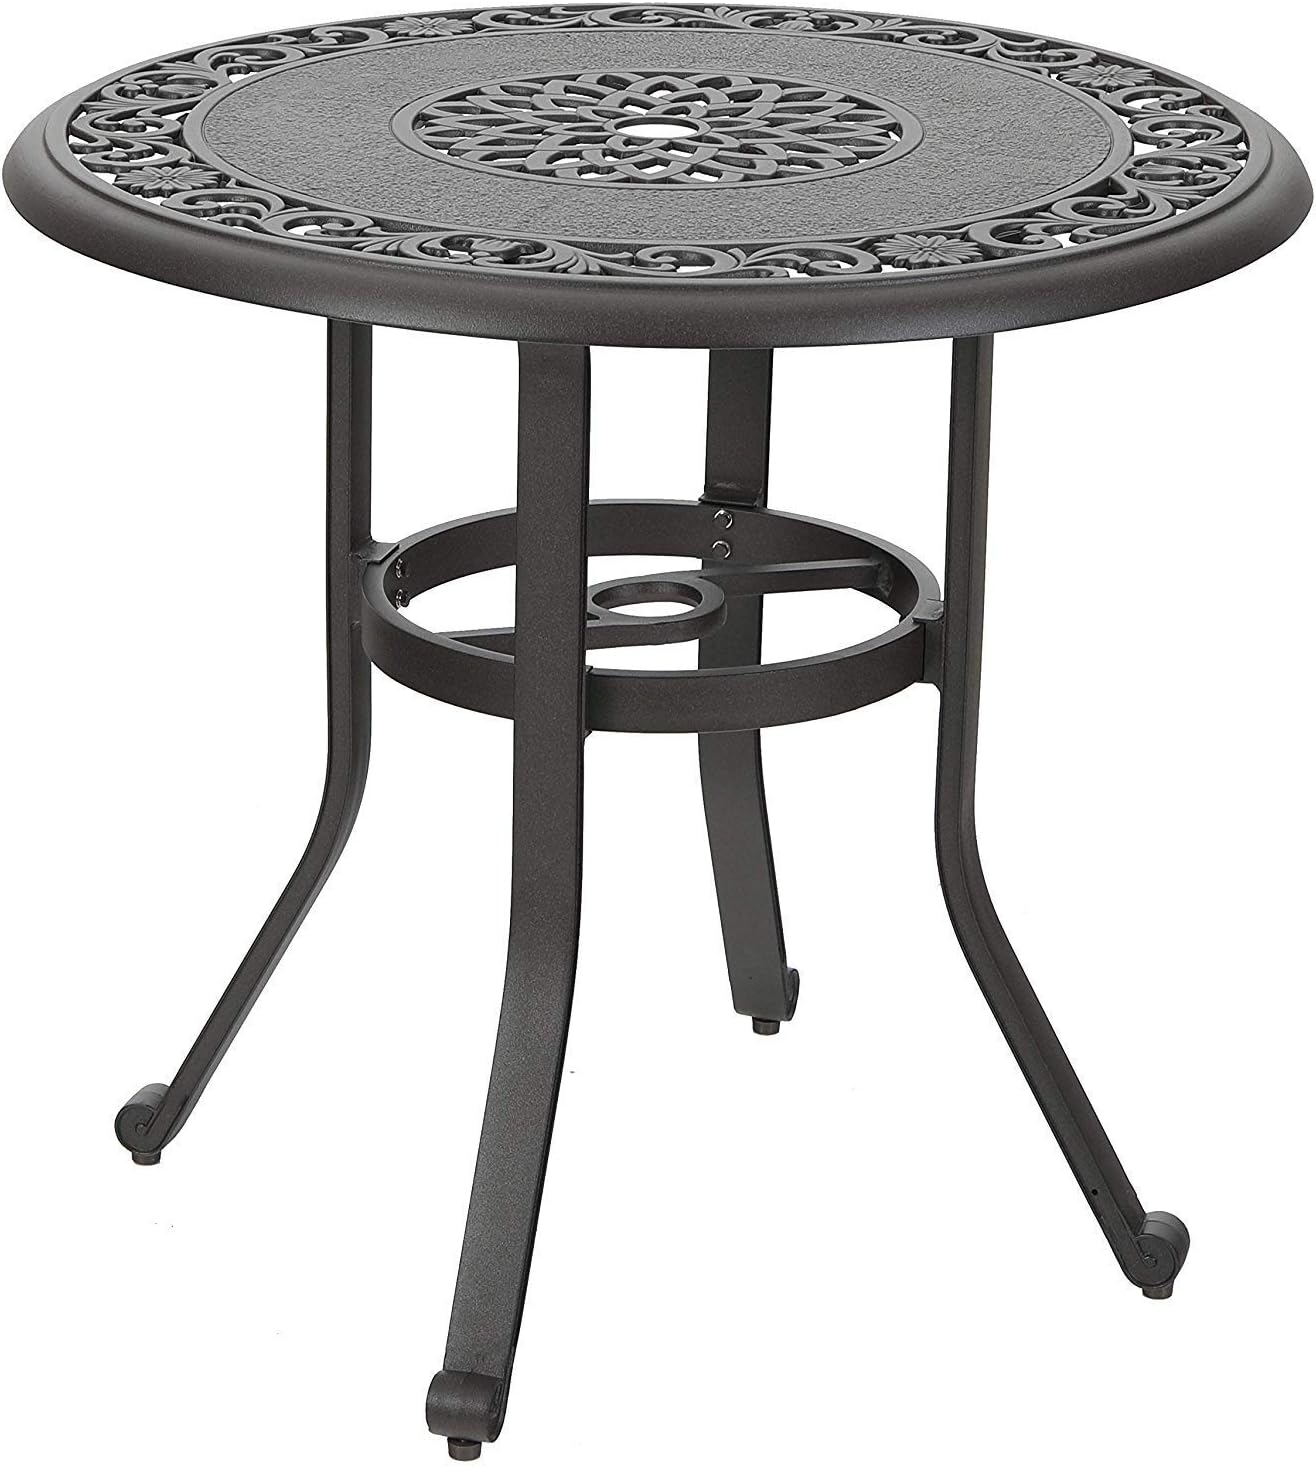 PHI VILLA 32 Outdoor Furniture Patio Bistro Table, Dining Coffee Tea Small Round Side End Tables for Garden, Backyard, Cast Aluminum with 1.75 Umbrella Hole, Dark Brown